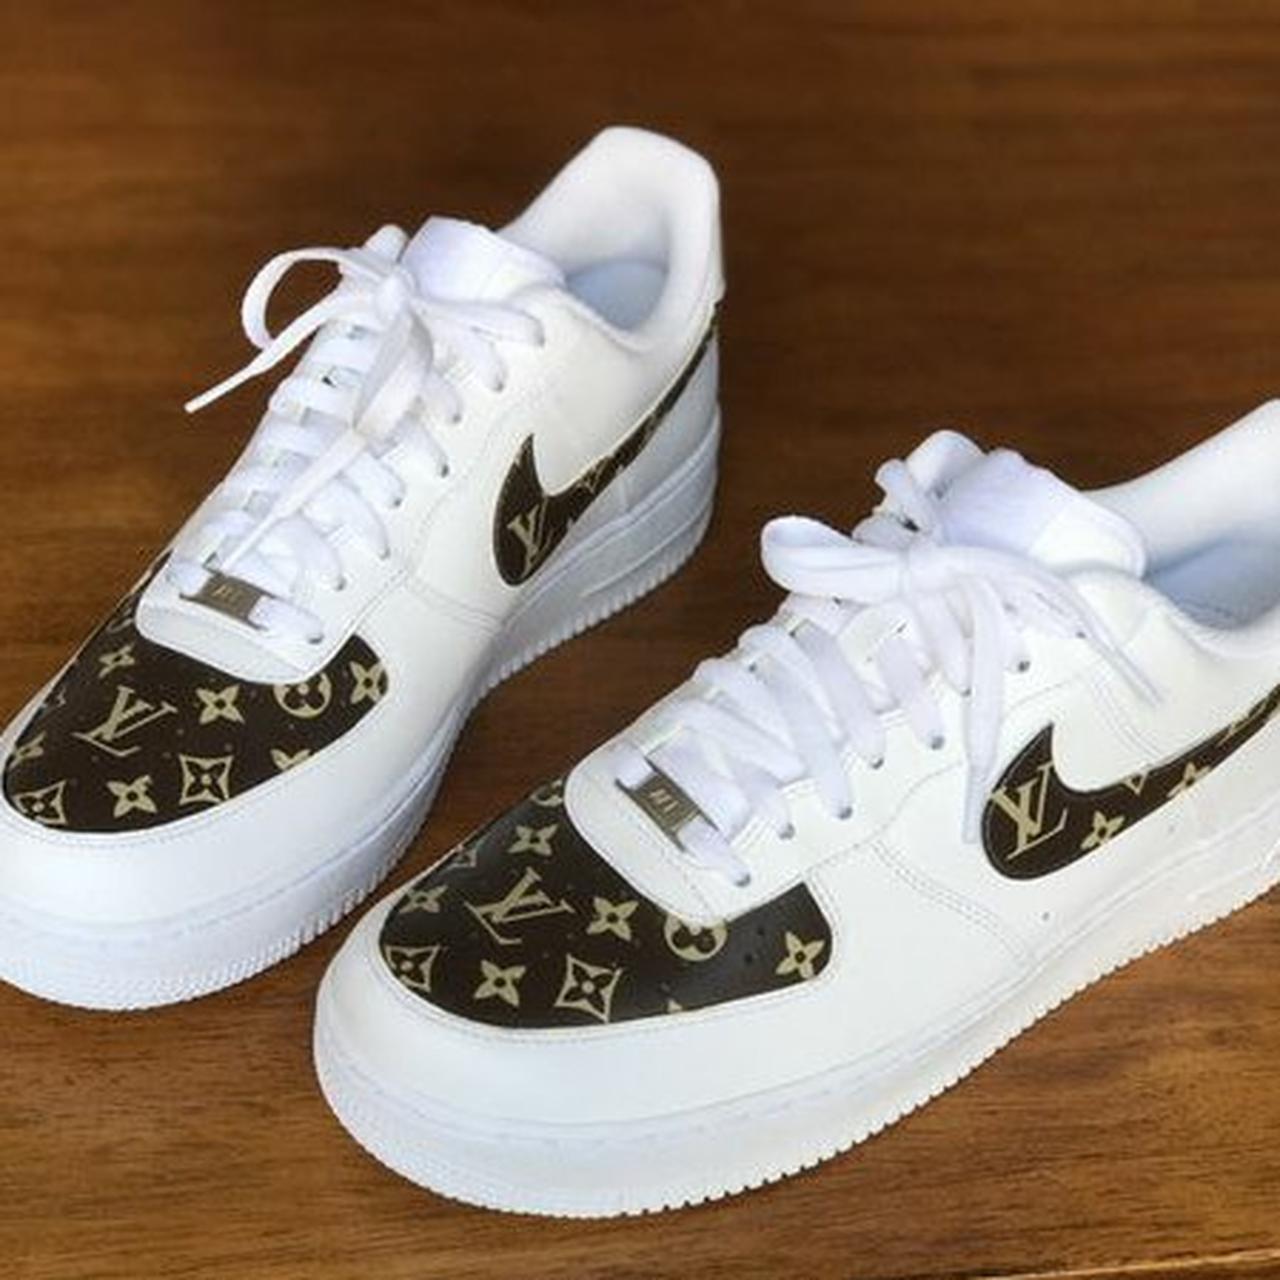 Louis Vuitton custom air force 1, These are made to